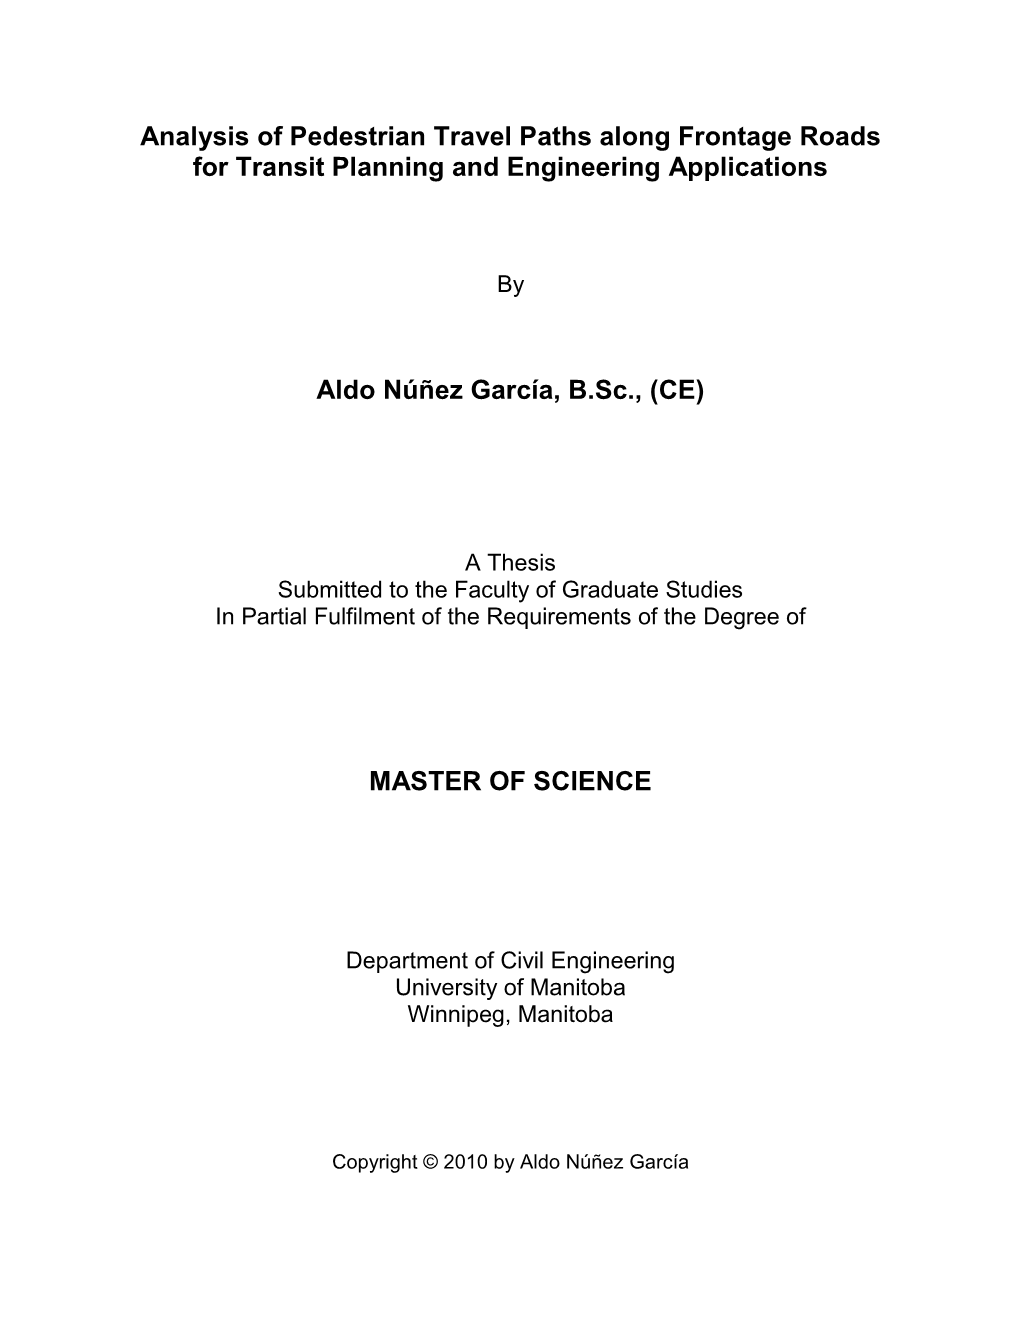 Analysis of Pedestrian Travel Paths Along Frontage Roads for Transit Planning and Engineering Applications